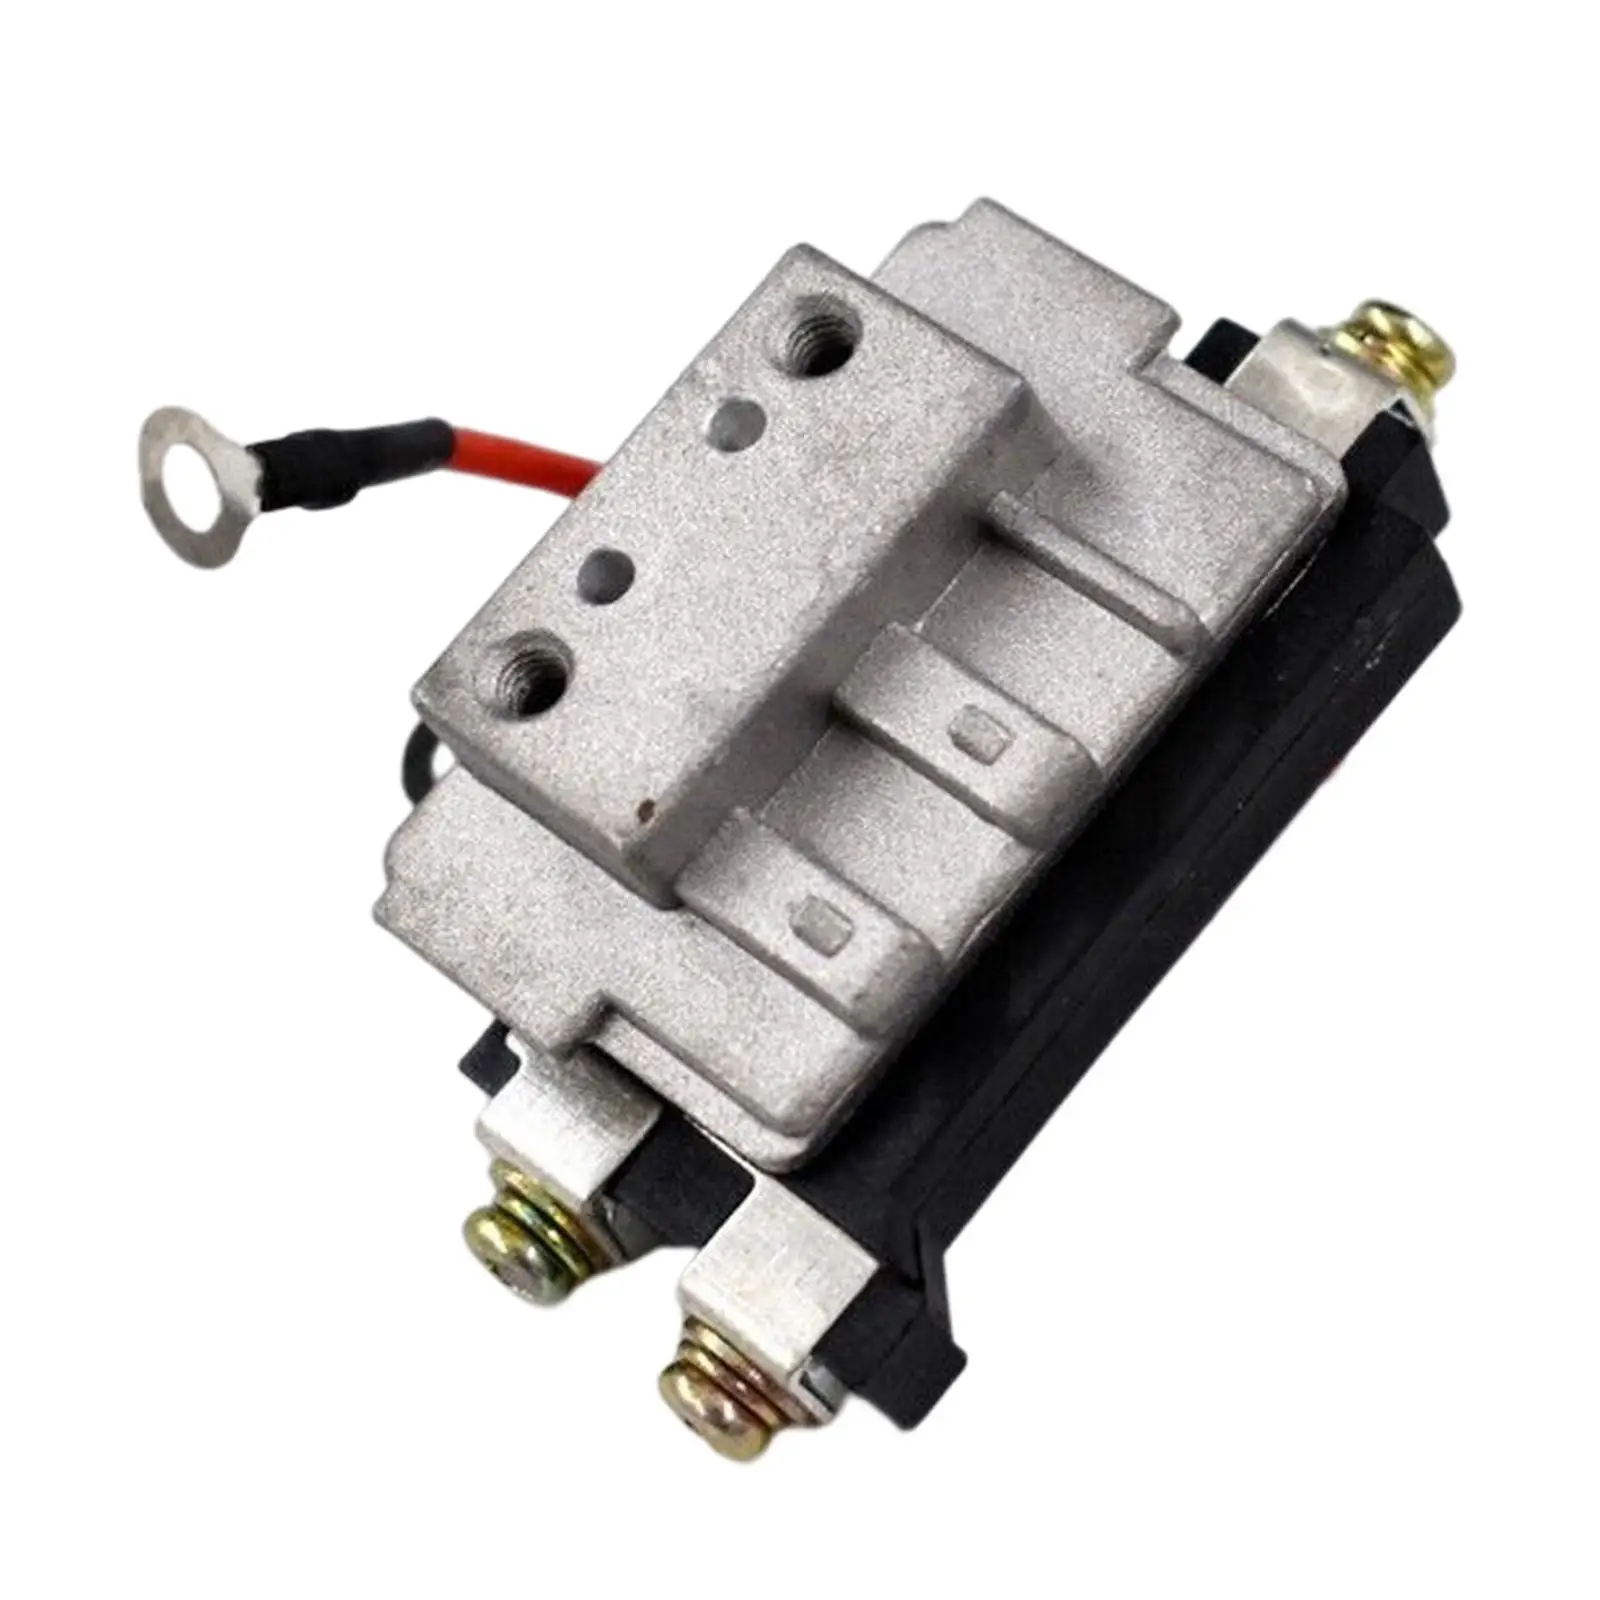 Ignition Module Replaces Easy to Install for Toyota Corolla 1993- 1995